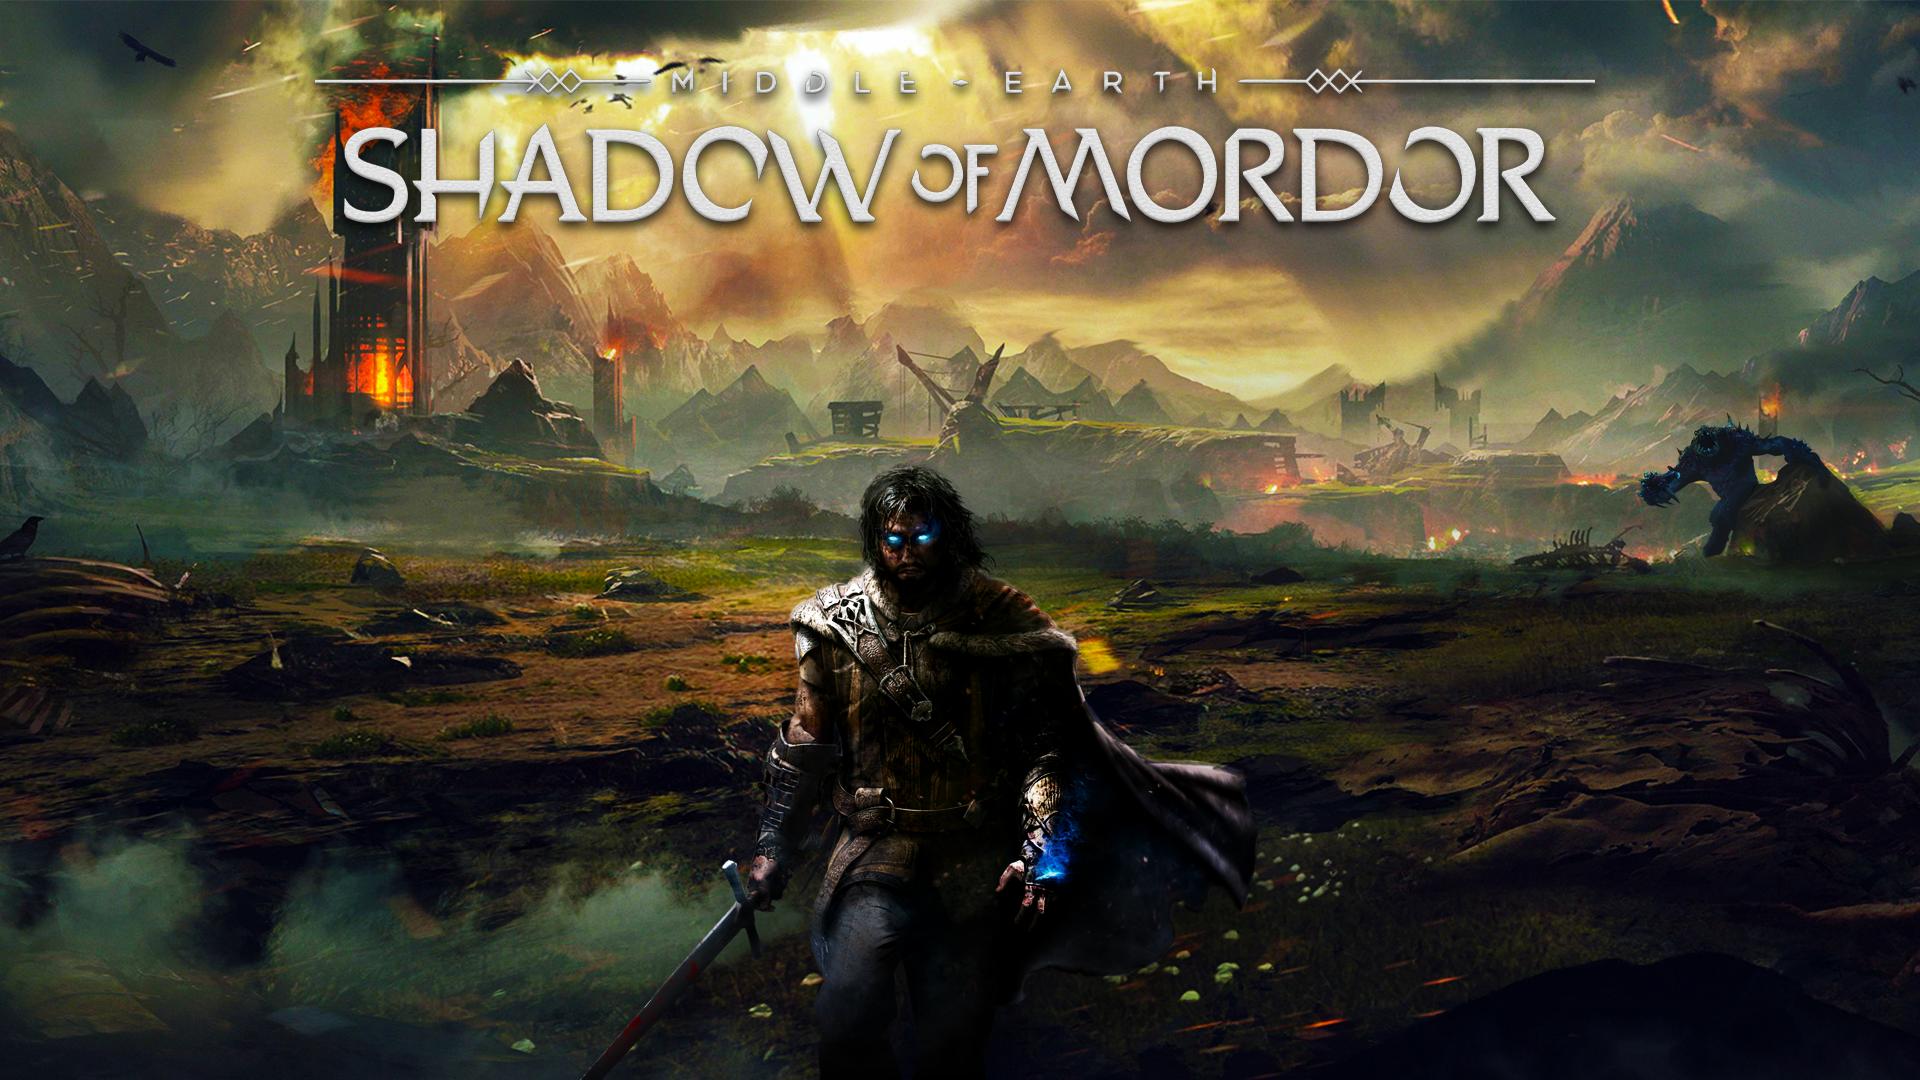 XBOX ONE Middle-Earth: Shadow of Mordor Game of the Year Edition (2015)  883929477241